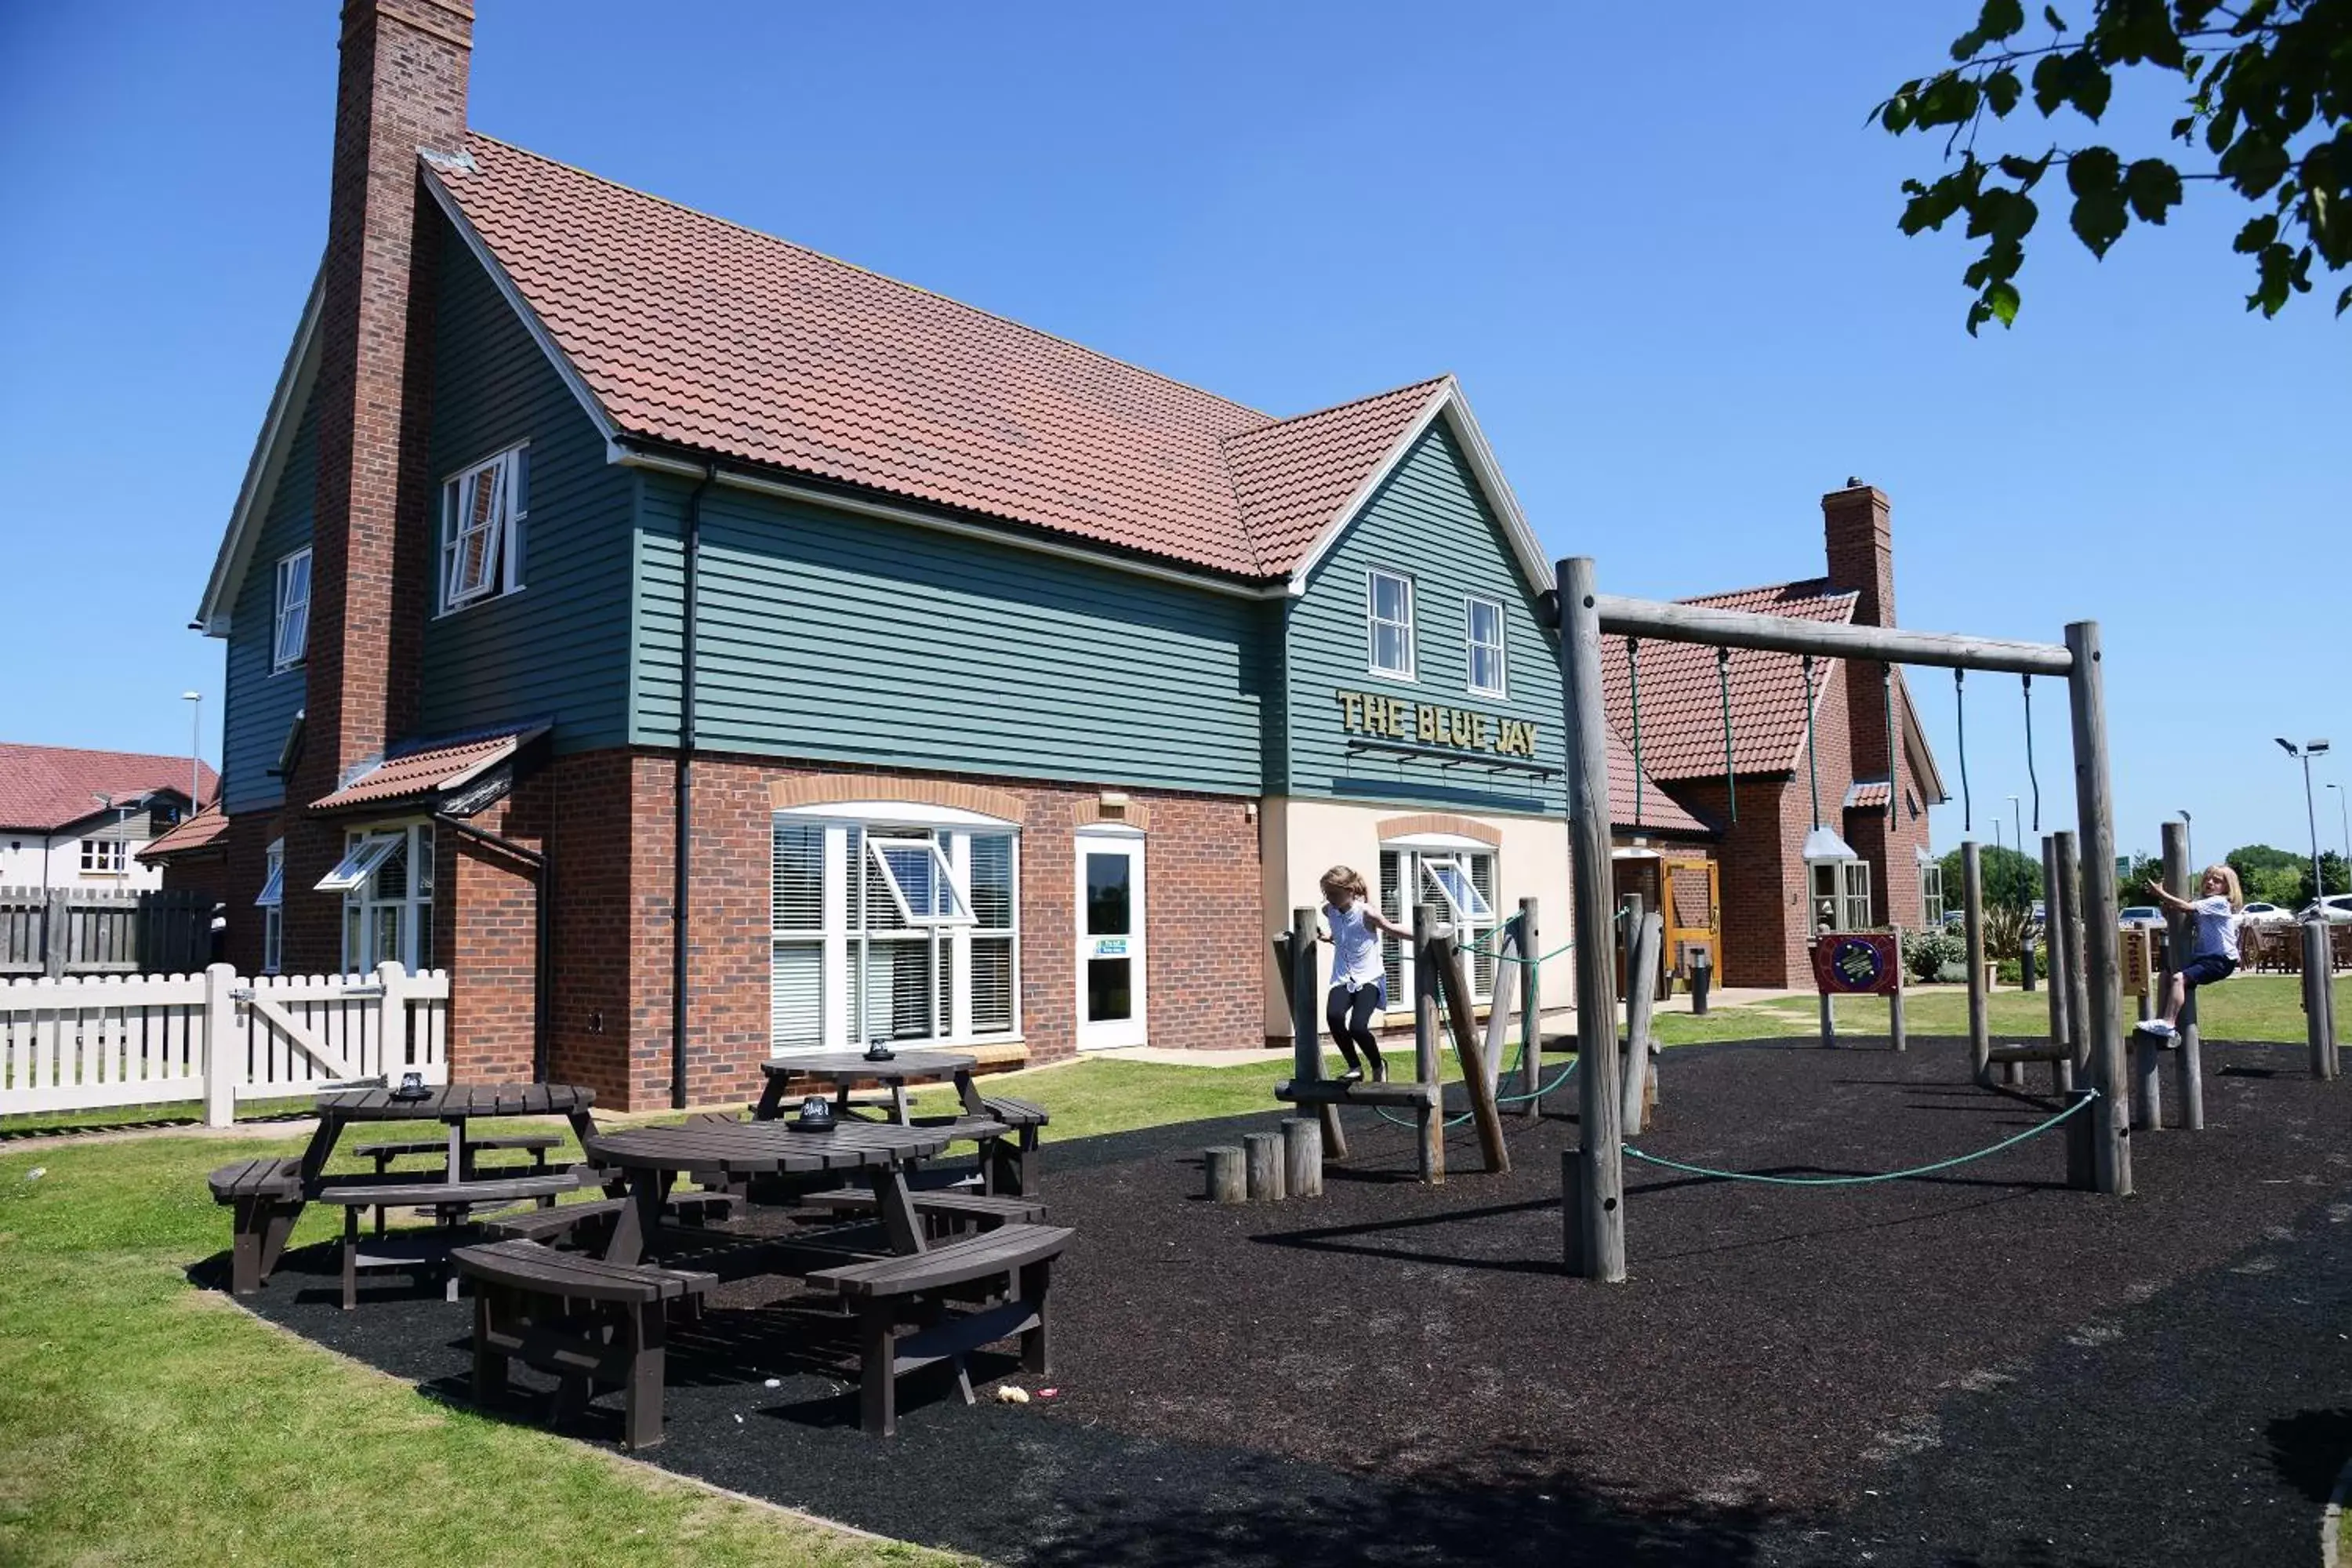 Children play ground, Property Building in Blue Jay, Derby by Marston's Inns